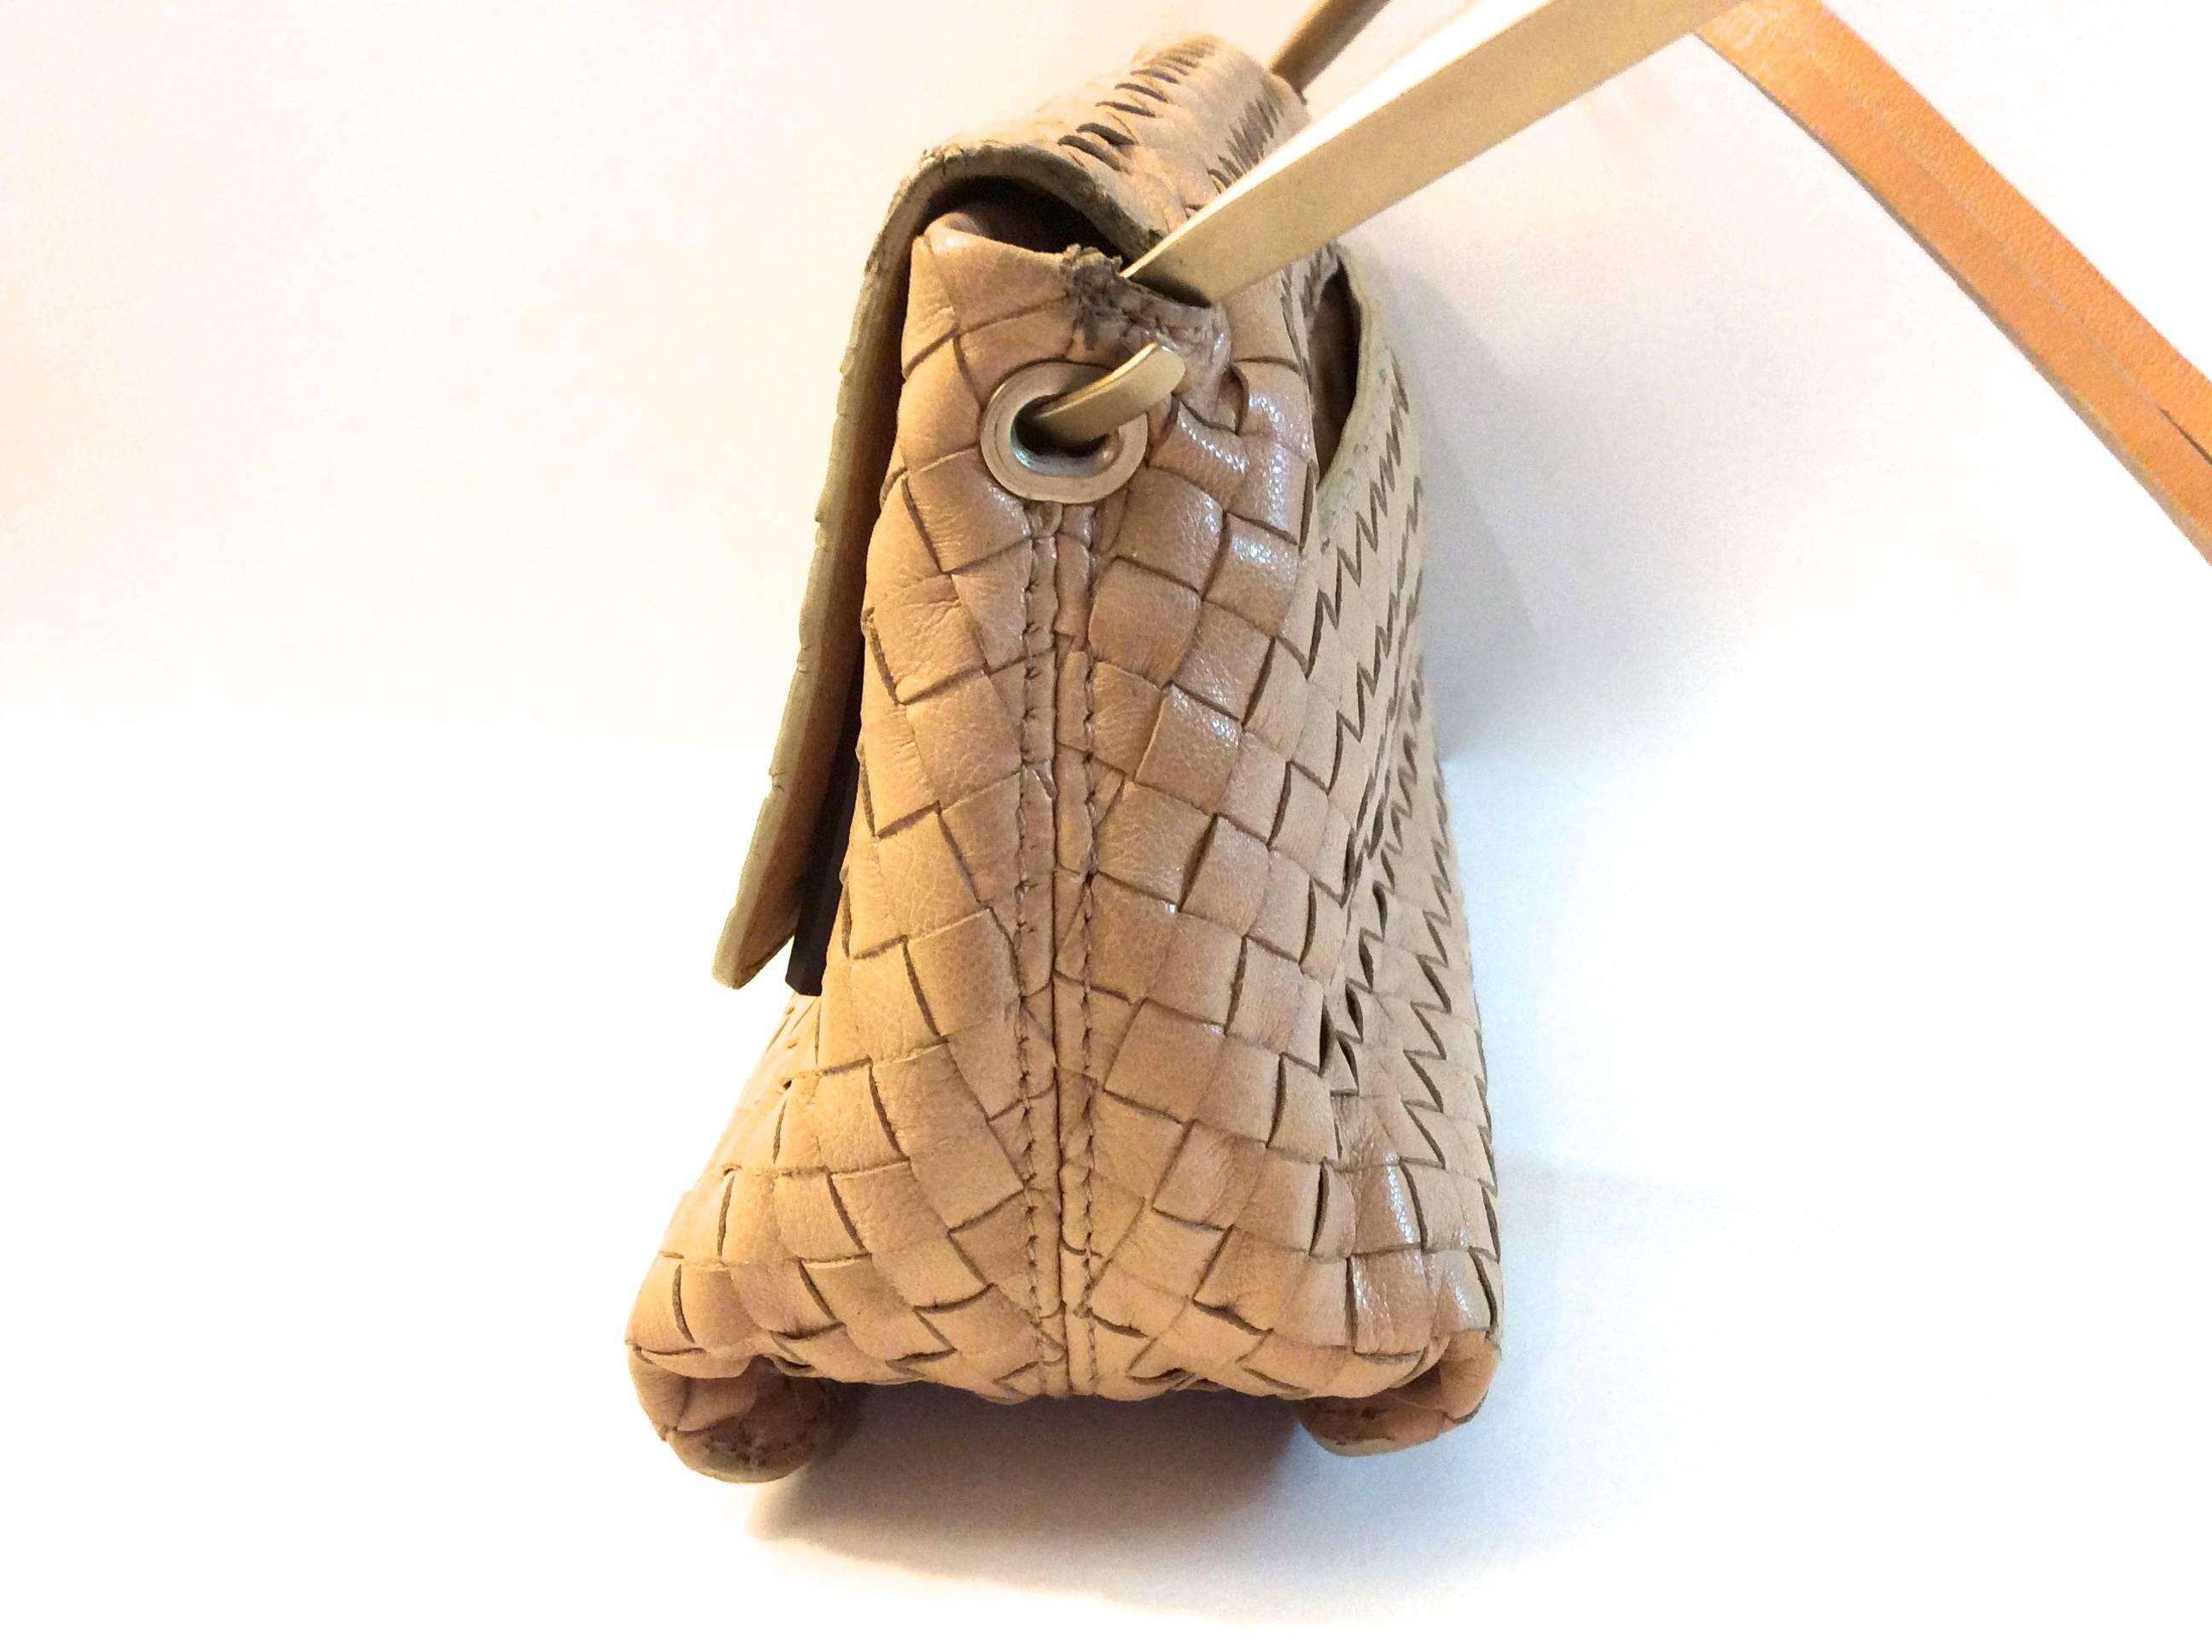 This beautiful Bottega Veneta handbag is beige. It is a small handle bag with one exterior non-zip pocket, and one interior zip pocket. The exterior leather of the bag is in excellent condition with little to no signs of wear. The magnet inside of